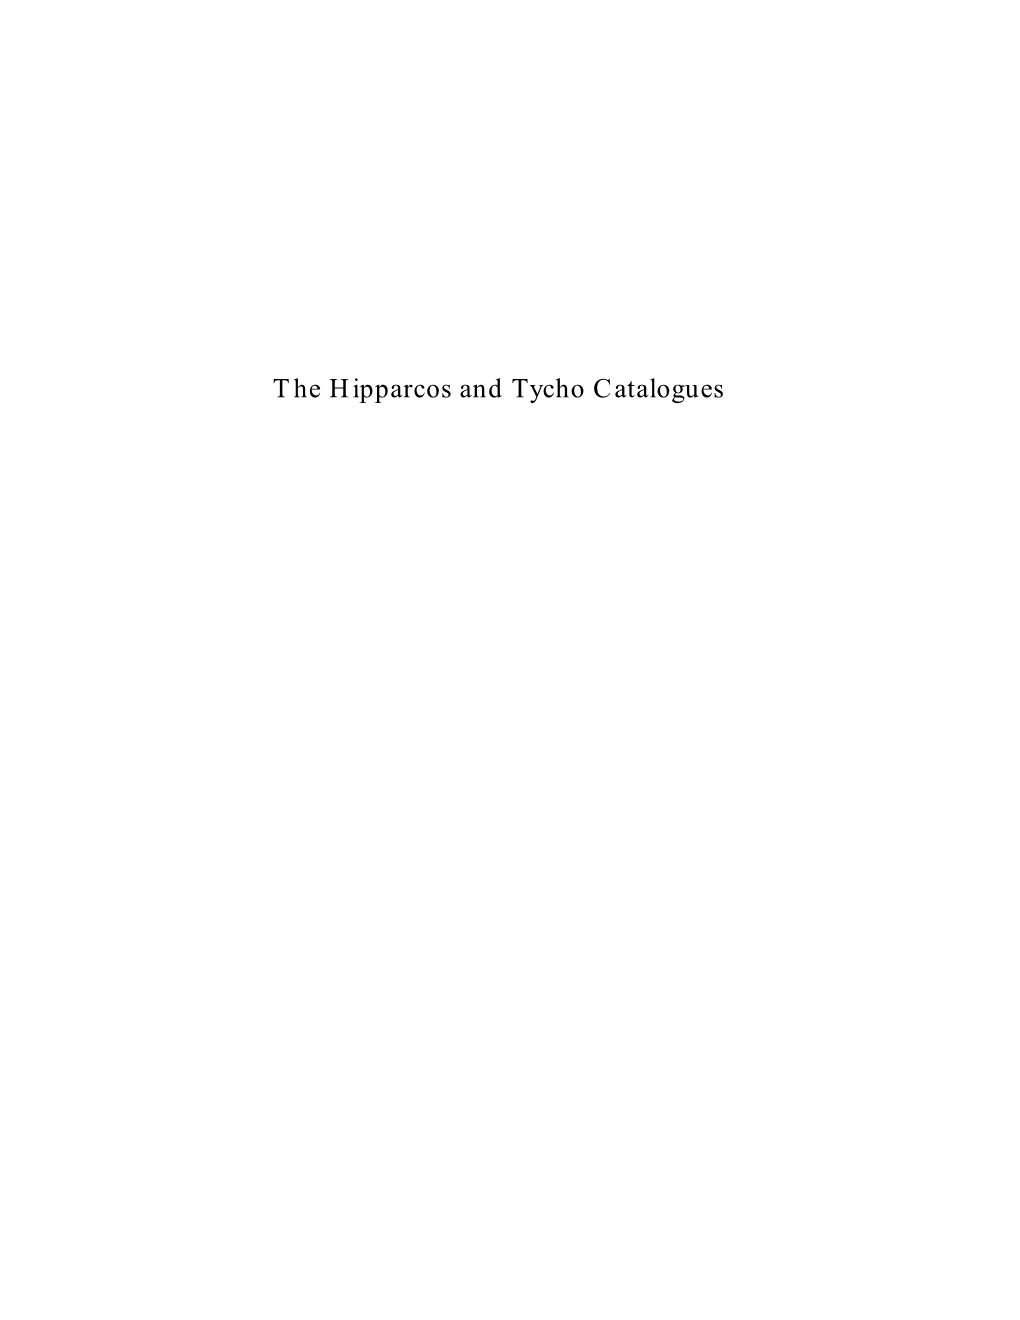 The Hipparcos and Tycho Catalogues